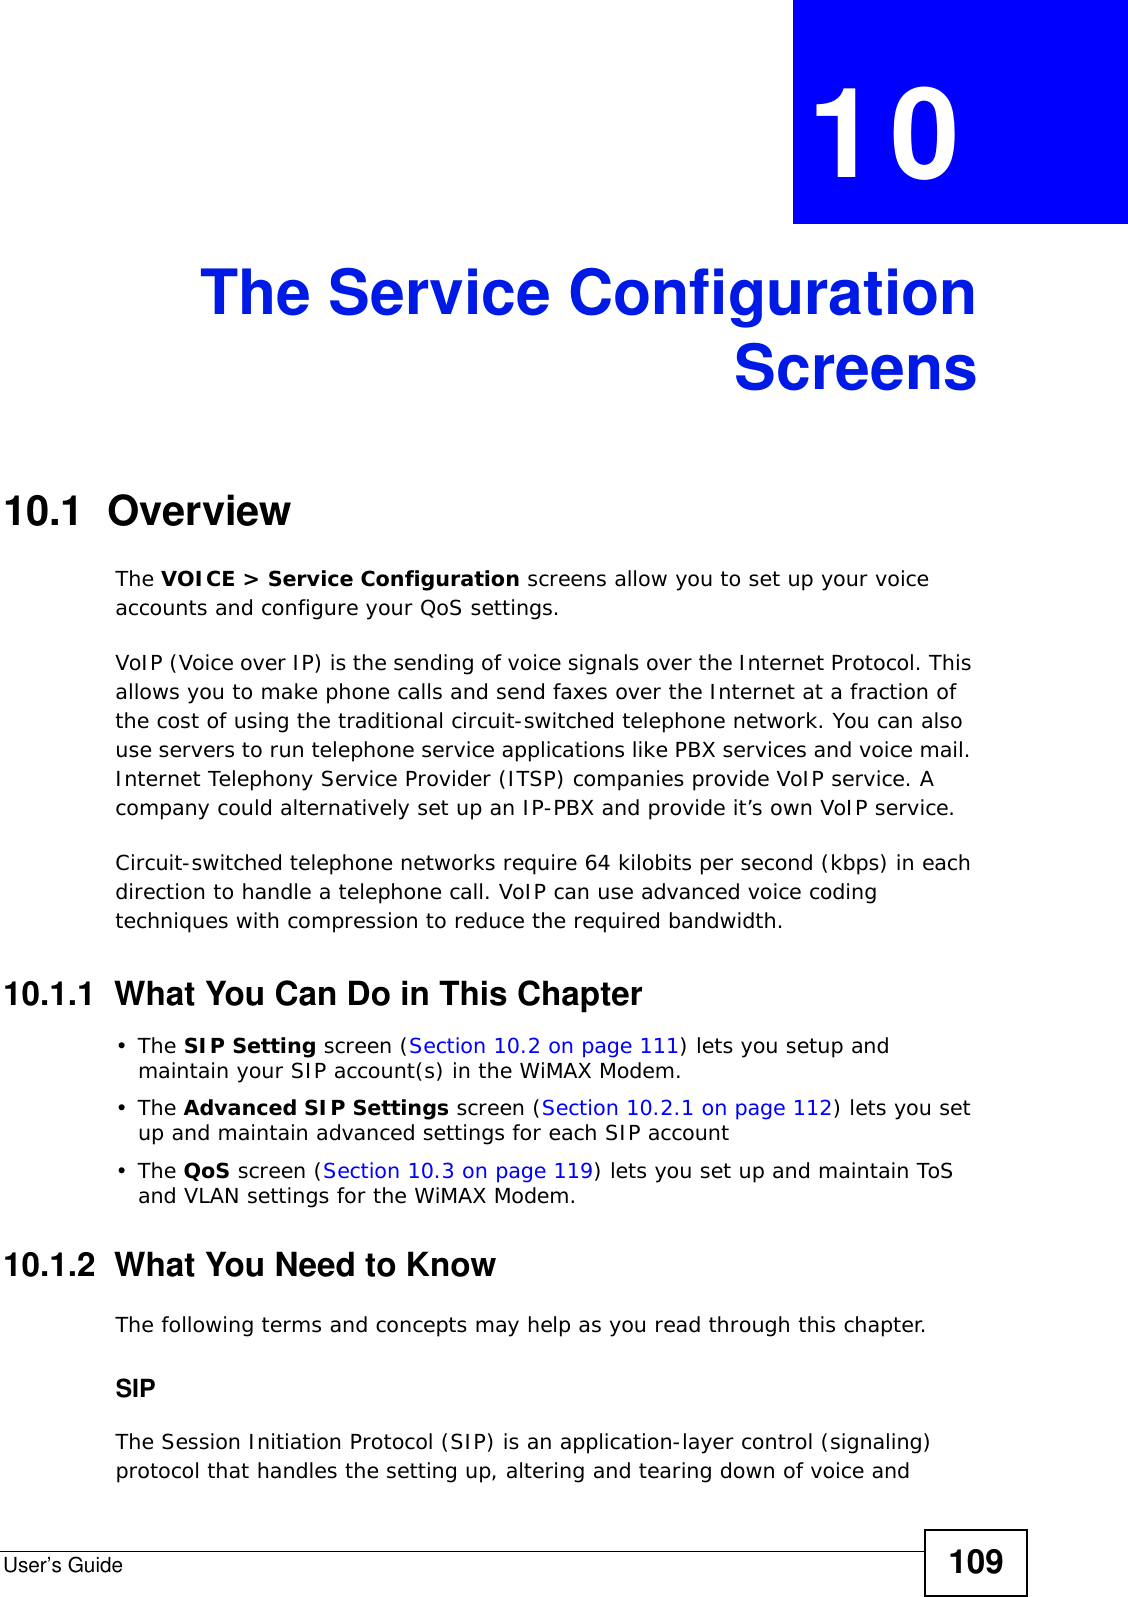 User’s Guide 109CHAPTER  10 The Service ConfigurationScreens10.1  OverviewThe VOICE &gt; Service Configuration screens allow you to set up your voice accounts and configure your QoS settings.VoIP (Voice over IP) is the sending of voice signals over the Internet Protocol. This allows you to make phone calls and send faxes over the Internet at a fraction of the cost of using the traditional circuit-switched telephone network. You can also use servers to run telephone service applications like PBX services and voice mail. Internet Telephony Service Provider (ITSP) companies provide VoIP service. A company could alternatively set up an IP-PBX and provide it’s own VoIP service.Circuit-switched telephone networks require 64 kilobits per second (kbps) in each direction to handle a telephone call. VoIP can use advanced voice coding techniques with compression to reduce the required bandwidth.10.1.1  What You Can Do in This Chapter•The SIP Setting screen (Section 10.2 on page 111) lets you setup and maintain your SIP account(s) in the WiMAX Modem.•The Advanced SIP Settings screen (Section 10.2.1 on page 112) lets you set up and maintain advanced settings for each SIP account•The QoS screen (Section 10.3 on page 119) lets you set up and maintain ToS and VLAN settings for the WiMAX Modem.10.1.2  What You Need to KnowThe following terms and concepts may help as you read through this chapter.SIPThe Session Initiation Protocol (SIP) is an application-layer control (signaling) protocol that handles the setting up, altering and tearing down of voice and 